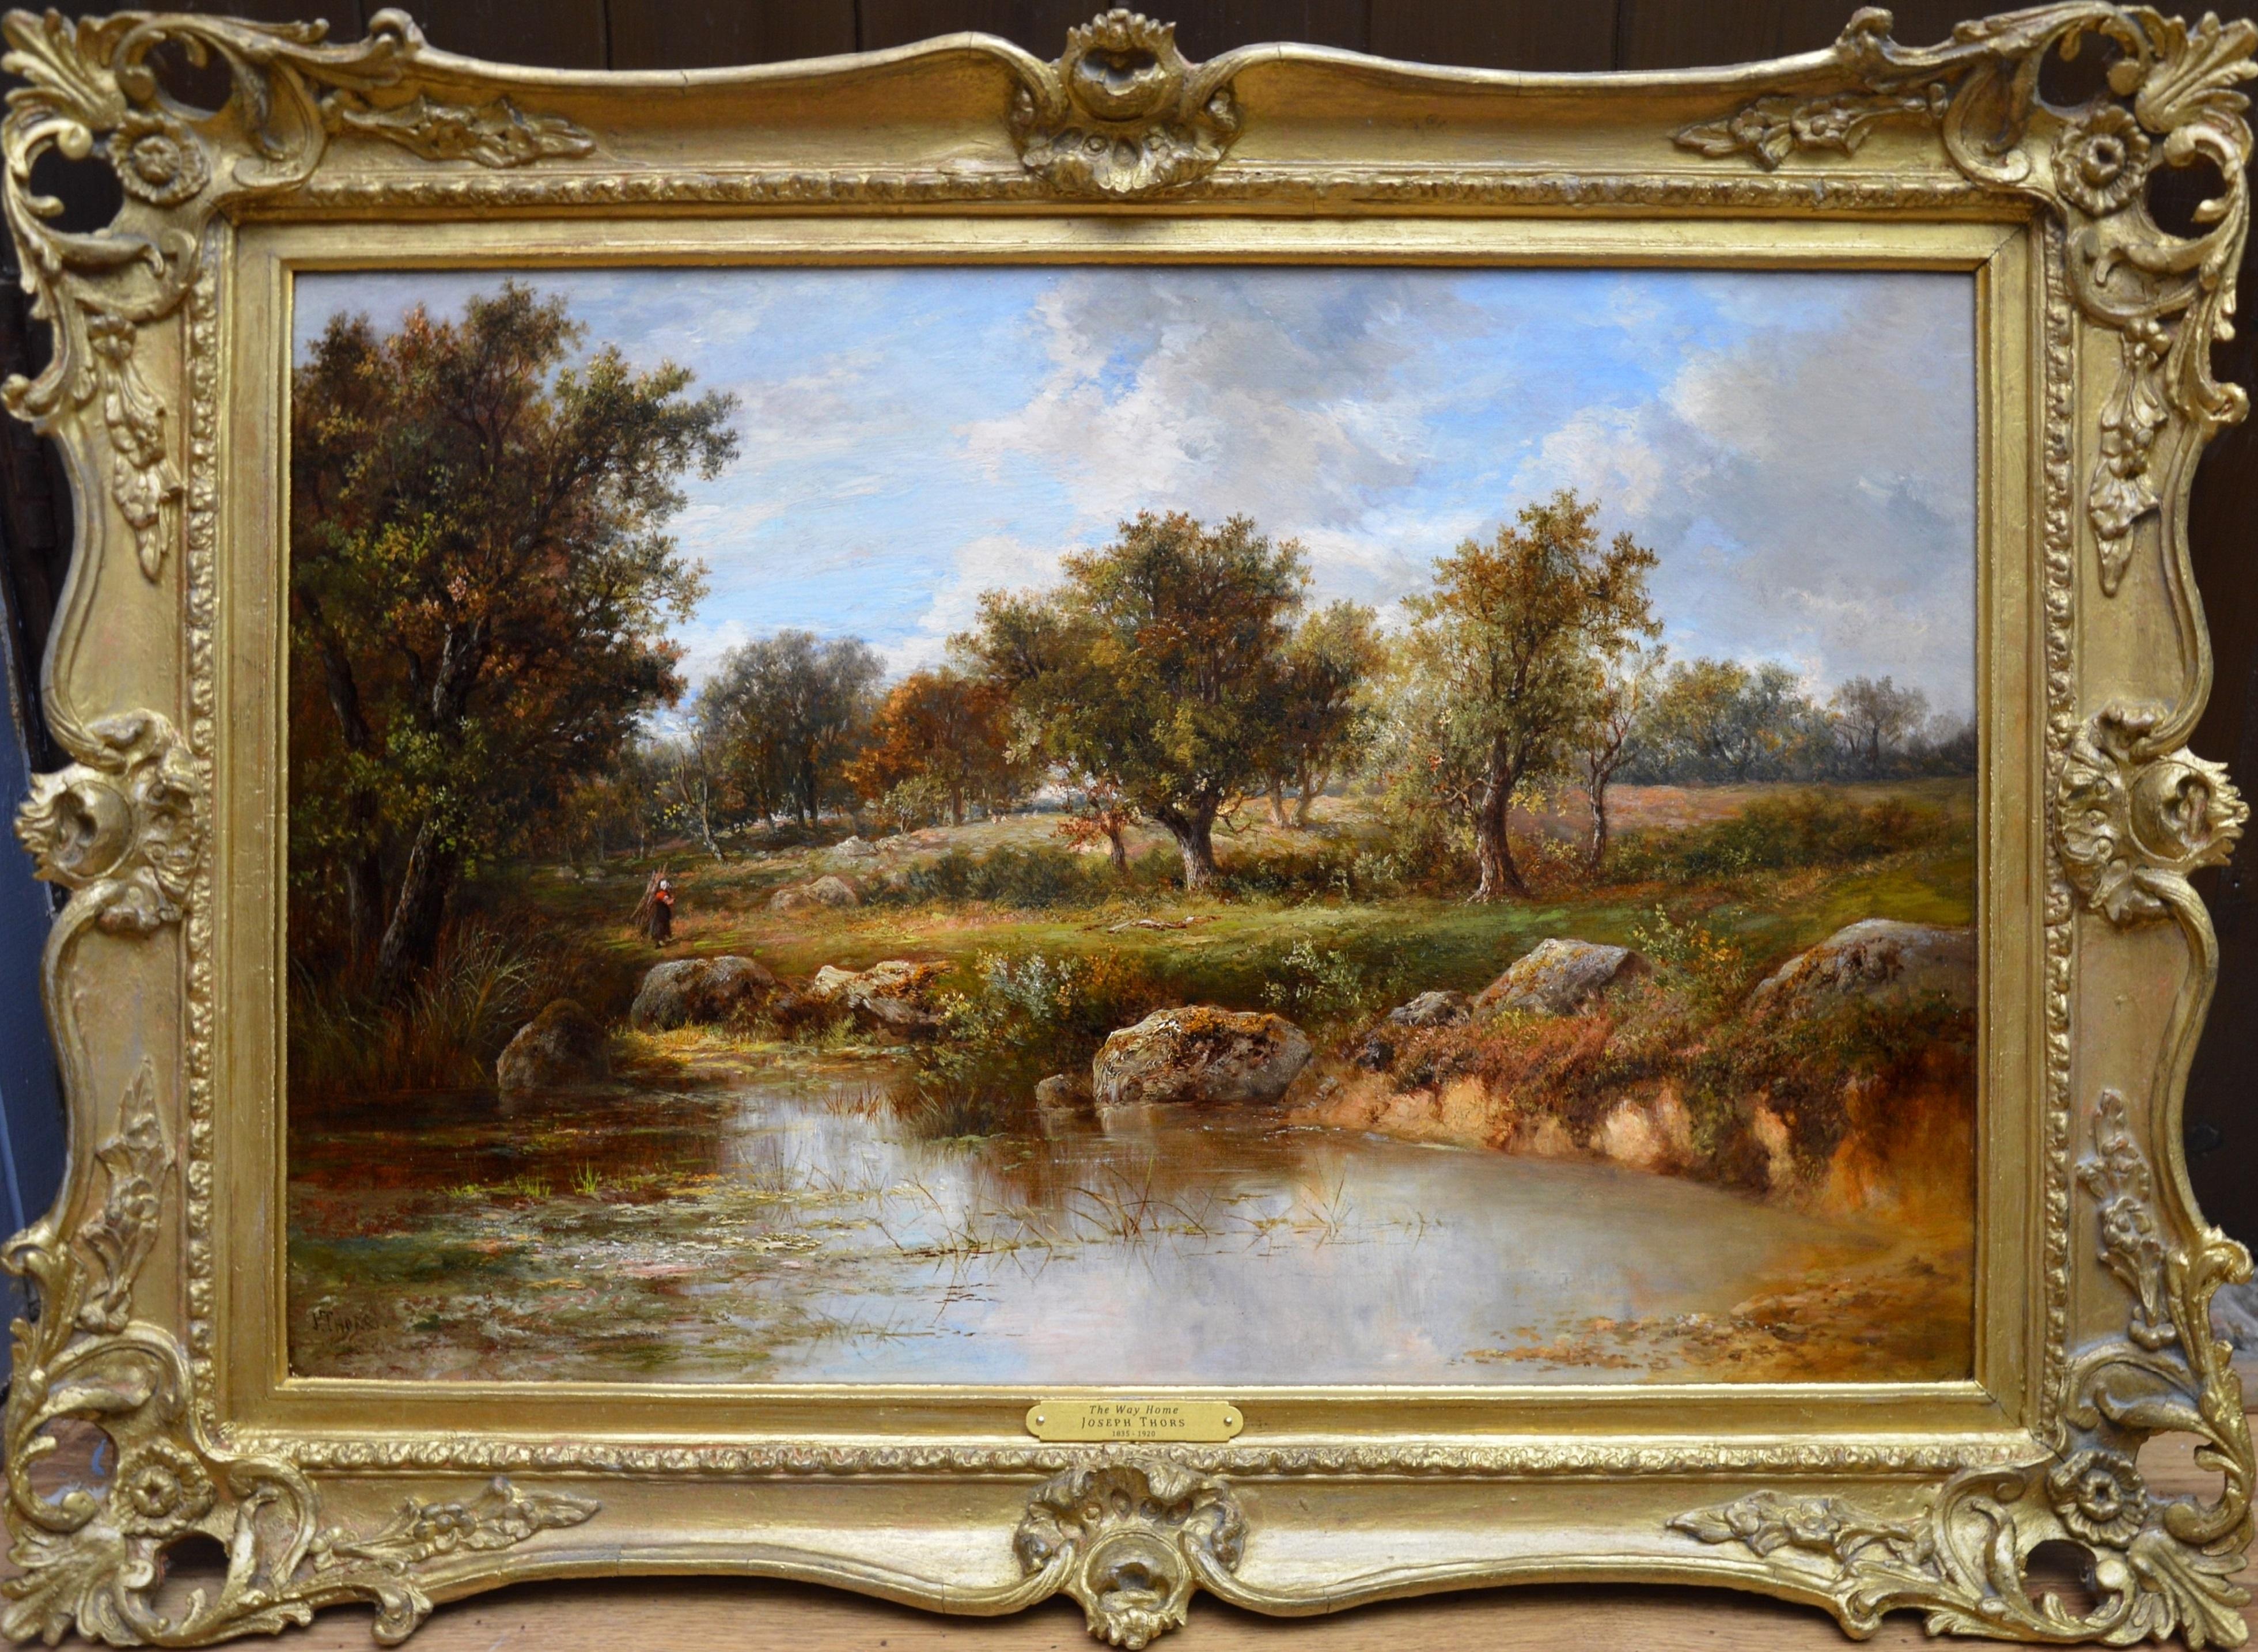 Joseph Thors Landscape Painting - The Way Home - 19th Century English Landscape Oil Painting